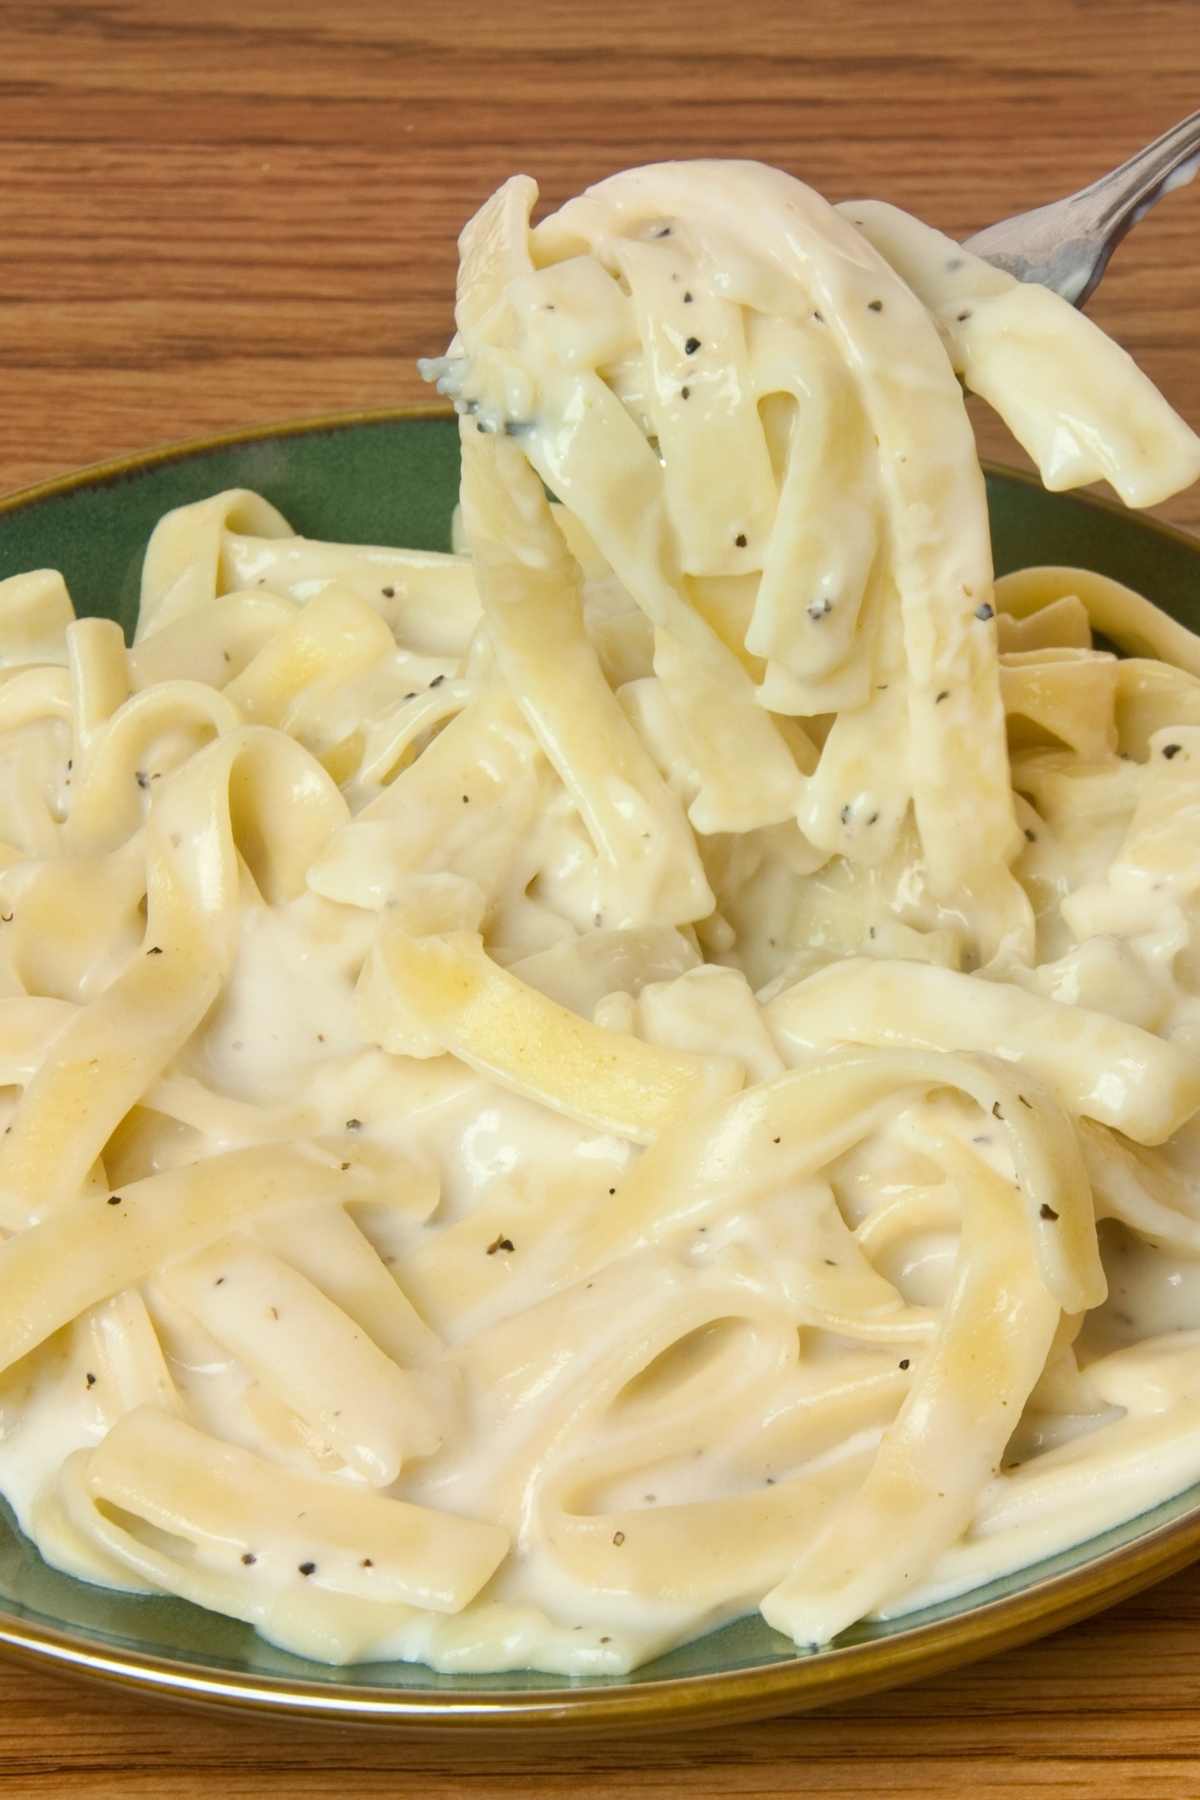 Pasta served with a heavy cream sauce is a favorite with kids and adults. This recipe for heavy cream pasta sauce is one of the best we’ve tasted.